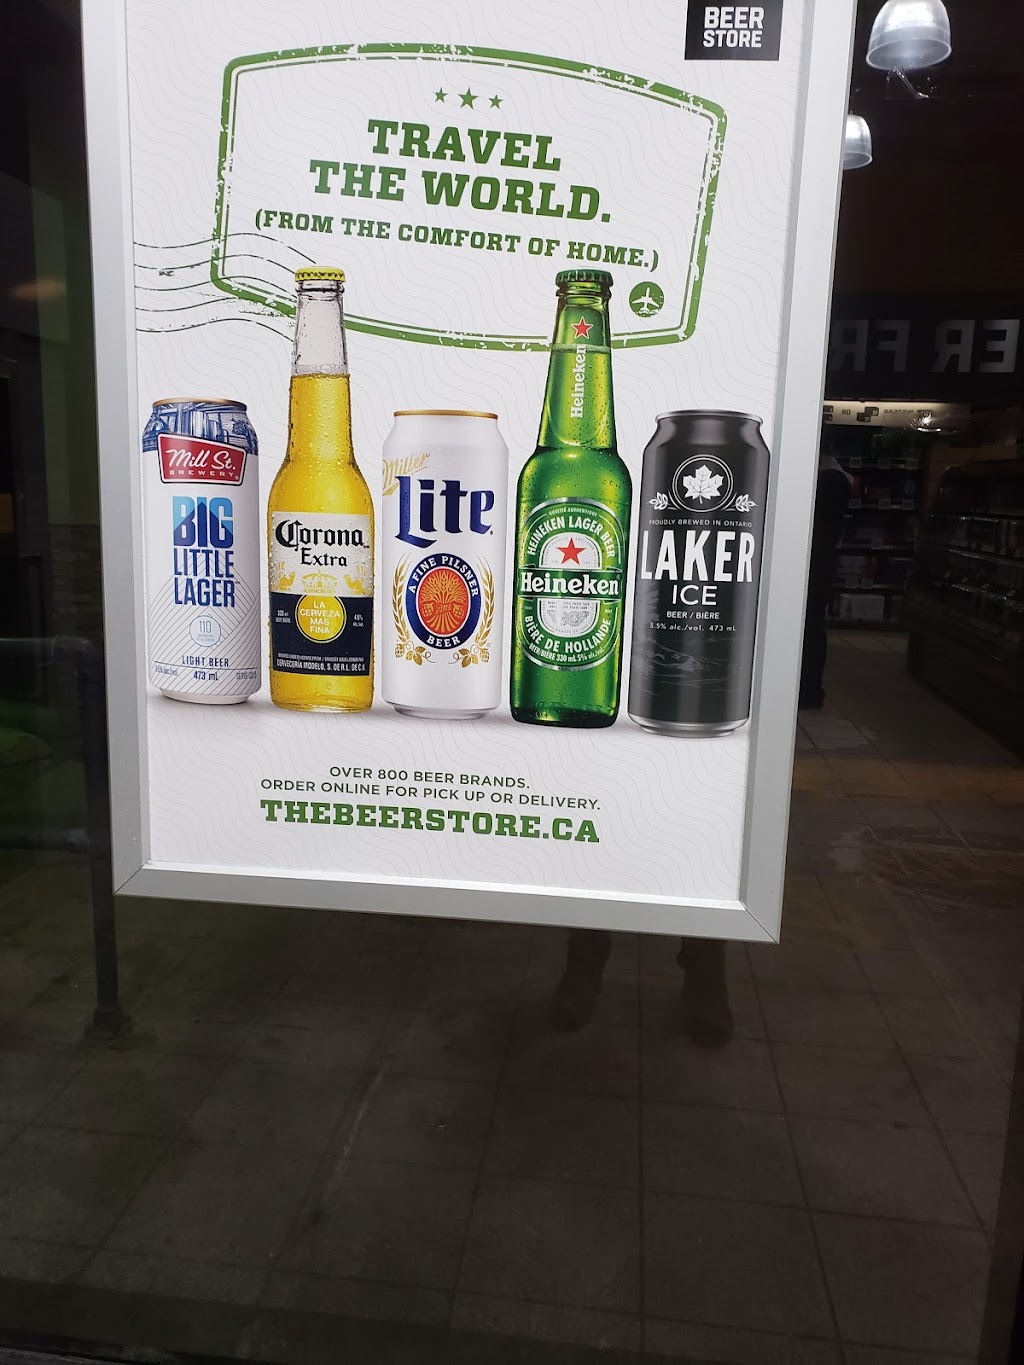 Beer Store 3106 | store | 155 Clarke Rd, London, ON N5W 5C9, Canada | 5194559150 OR +1 519-455-9150